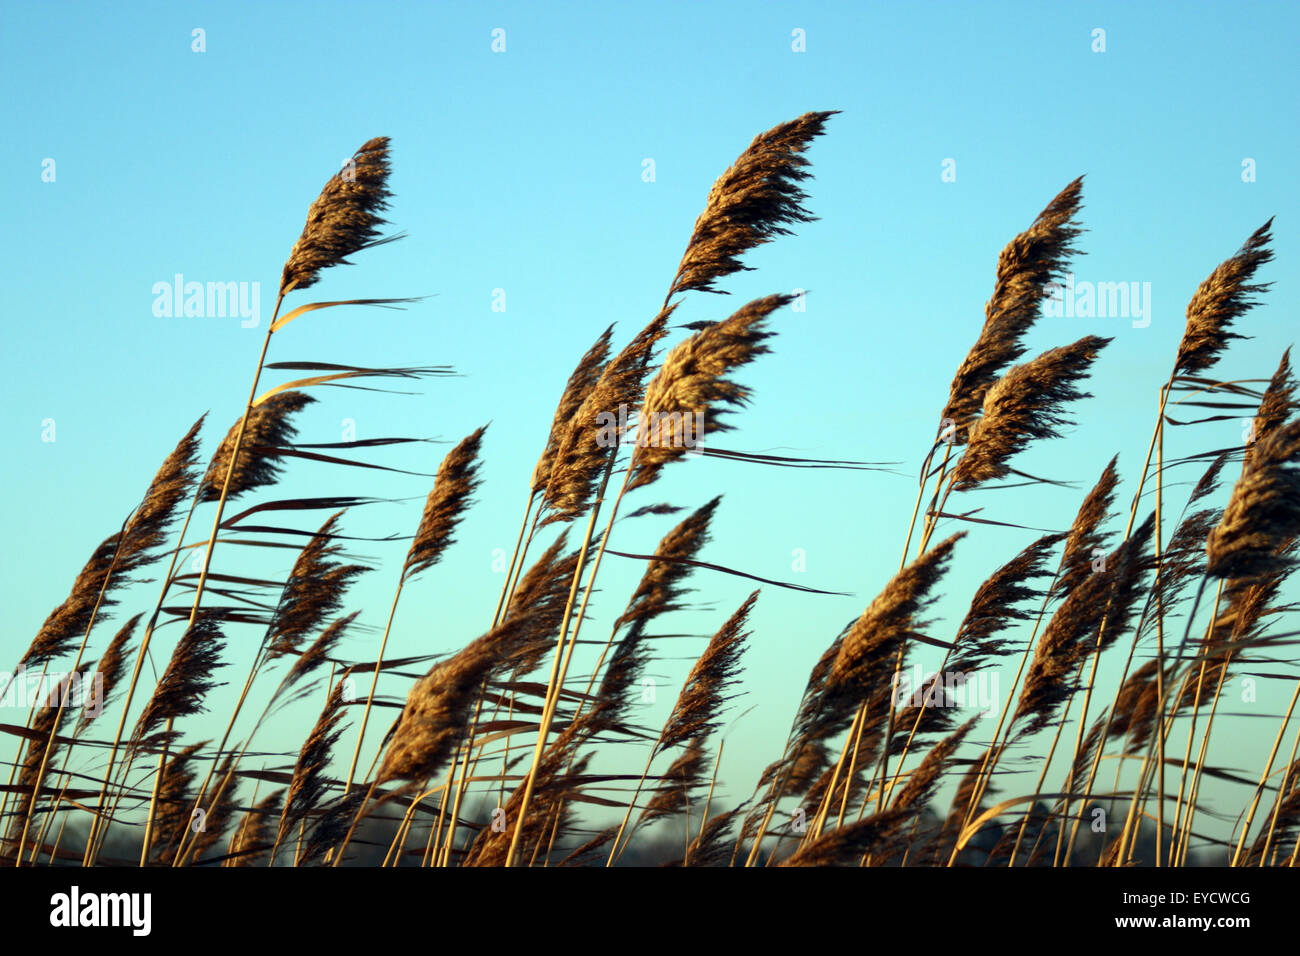 Wild reeds against a light blue dawn sky give way to the wind in harmony and unison, as they have done for eons. Stock Photo